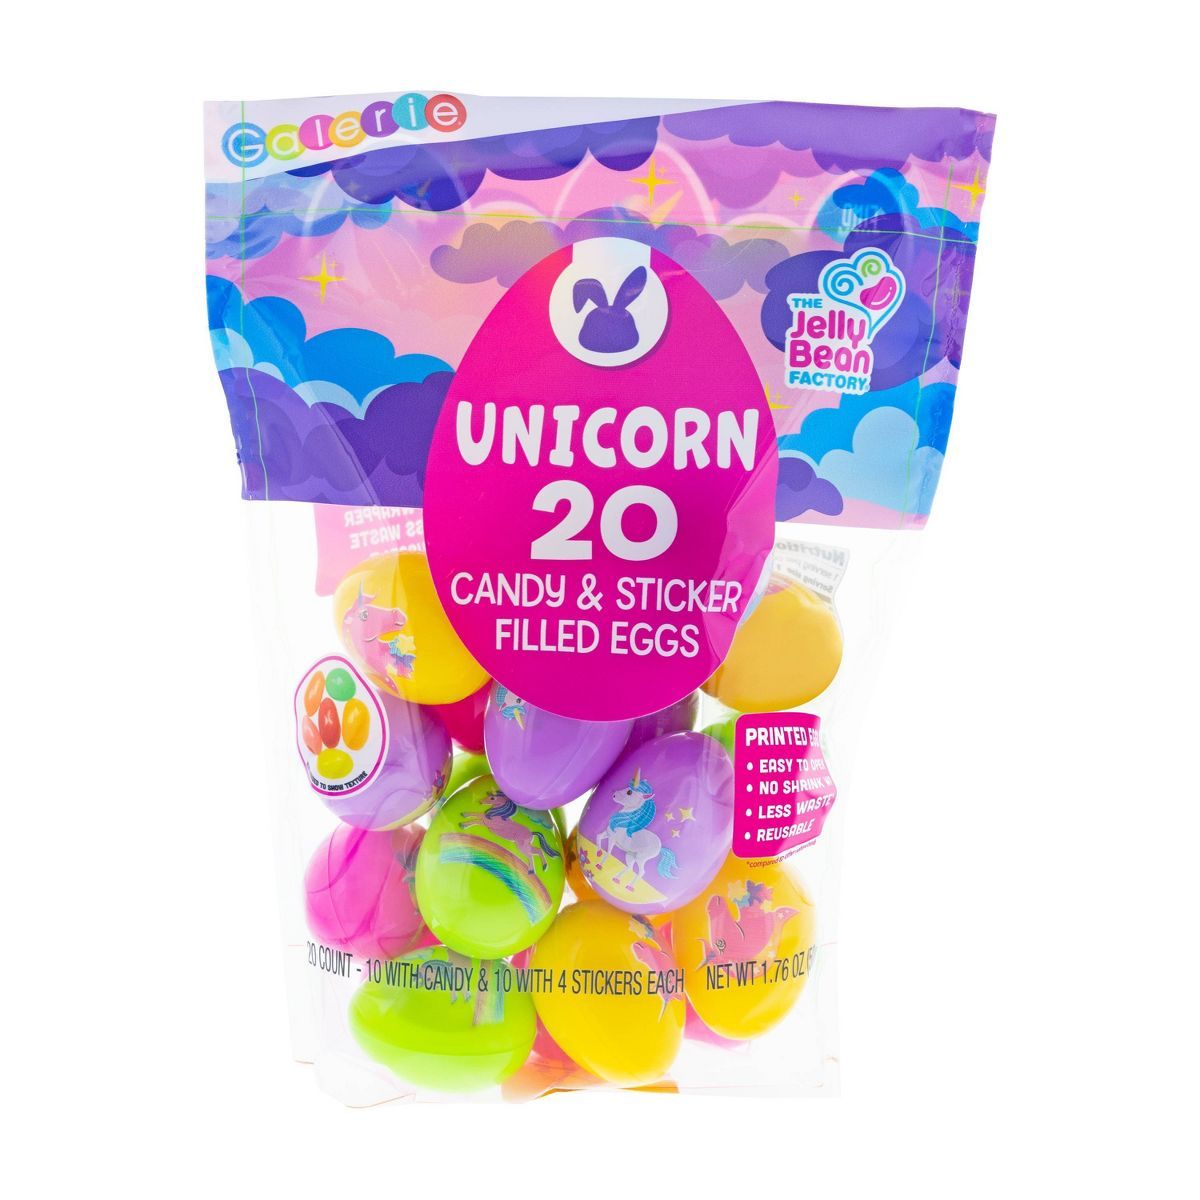 Galerie Easter Printed Unicorn Egg Bag with Jelly Beans - 1.76oz/20ct | Target